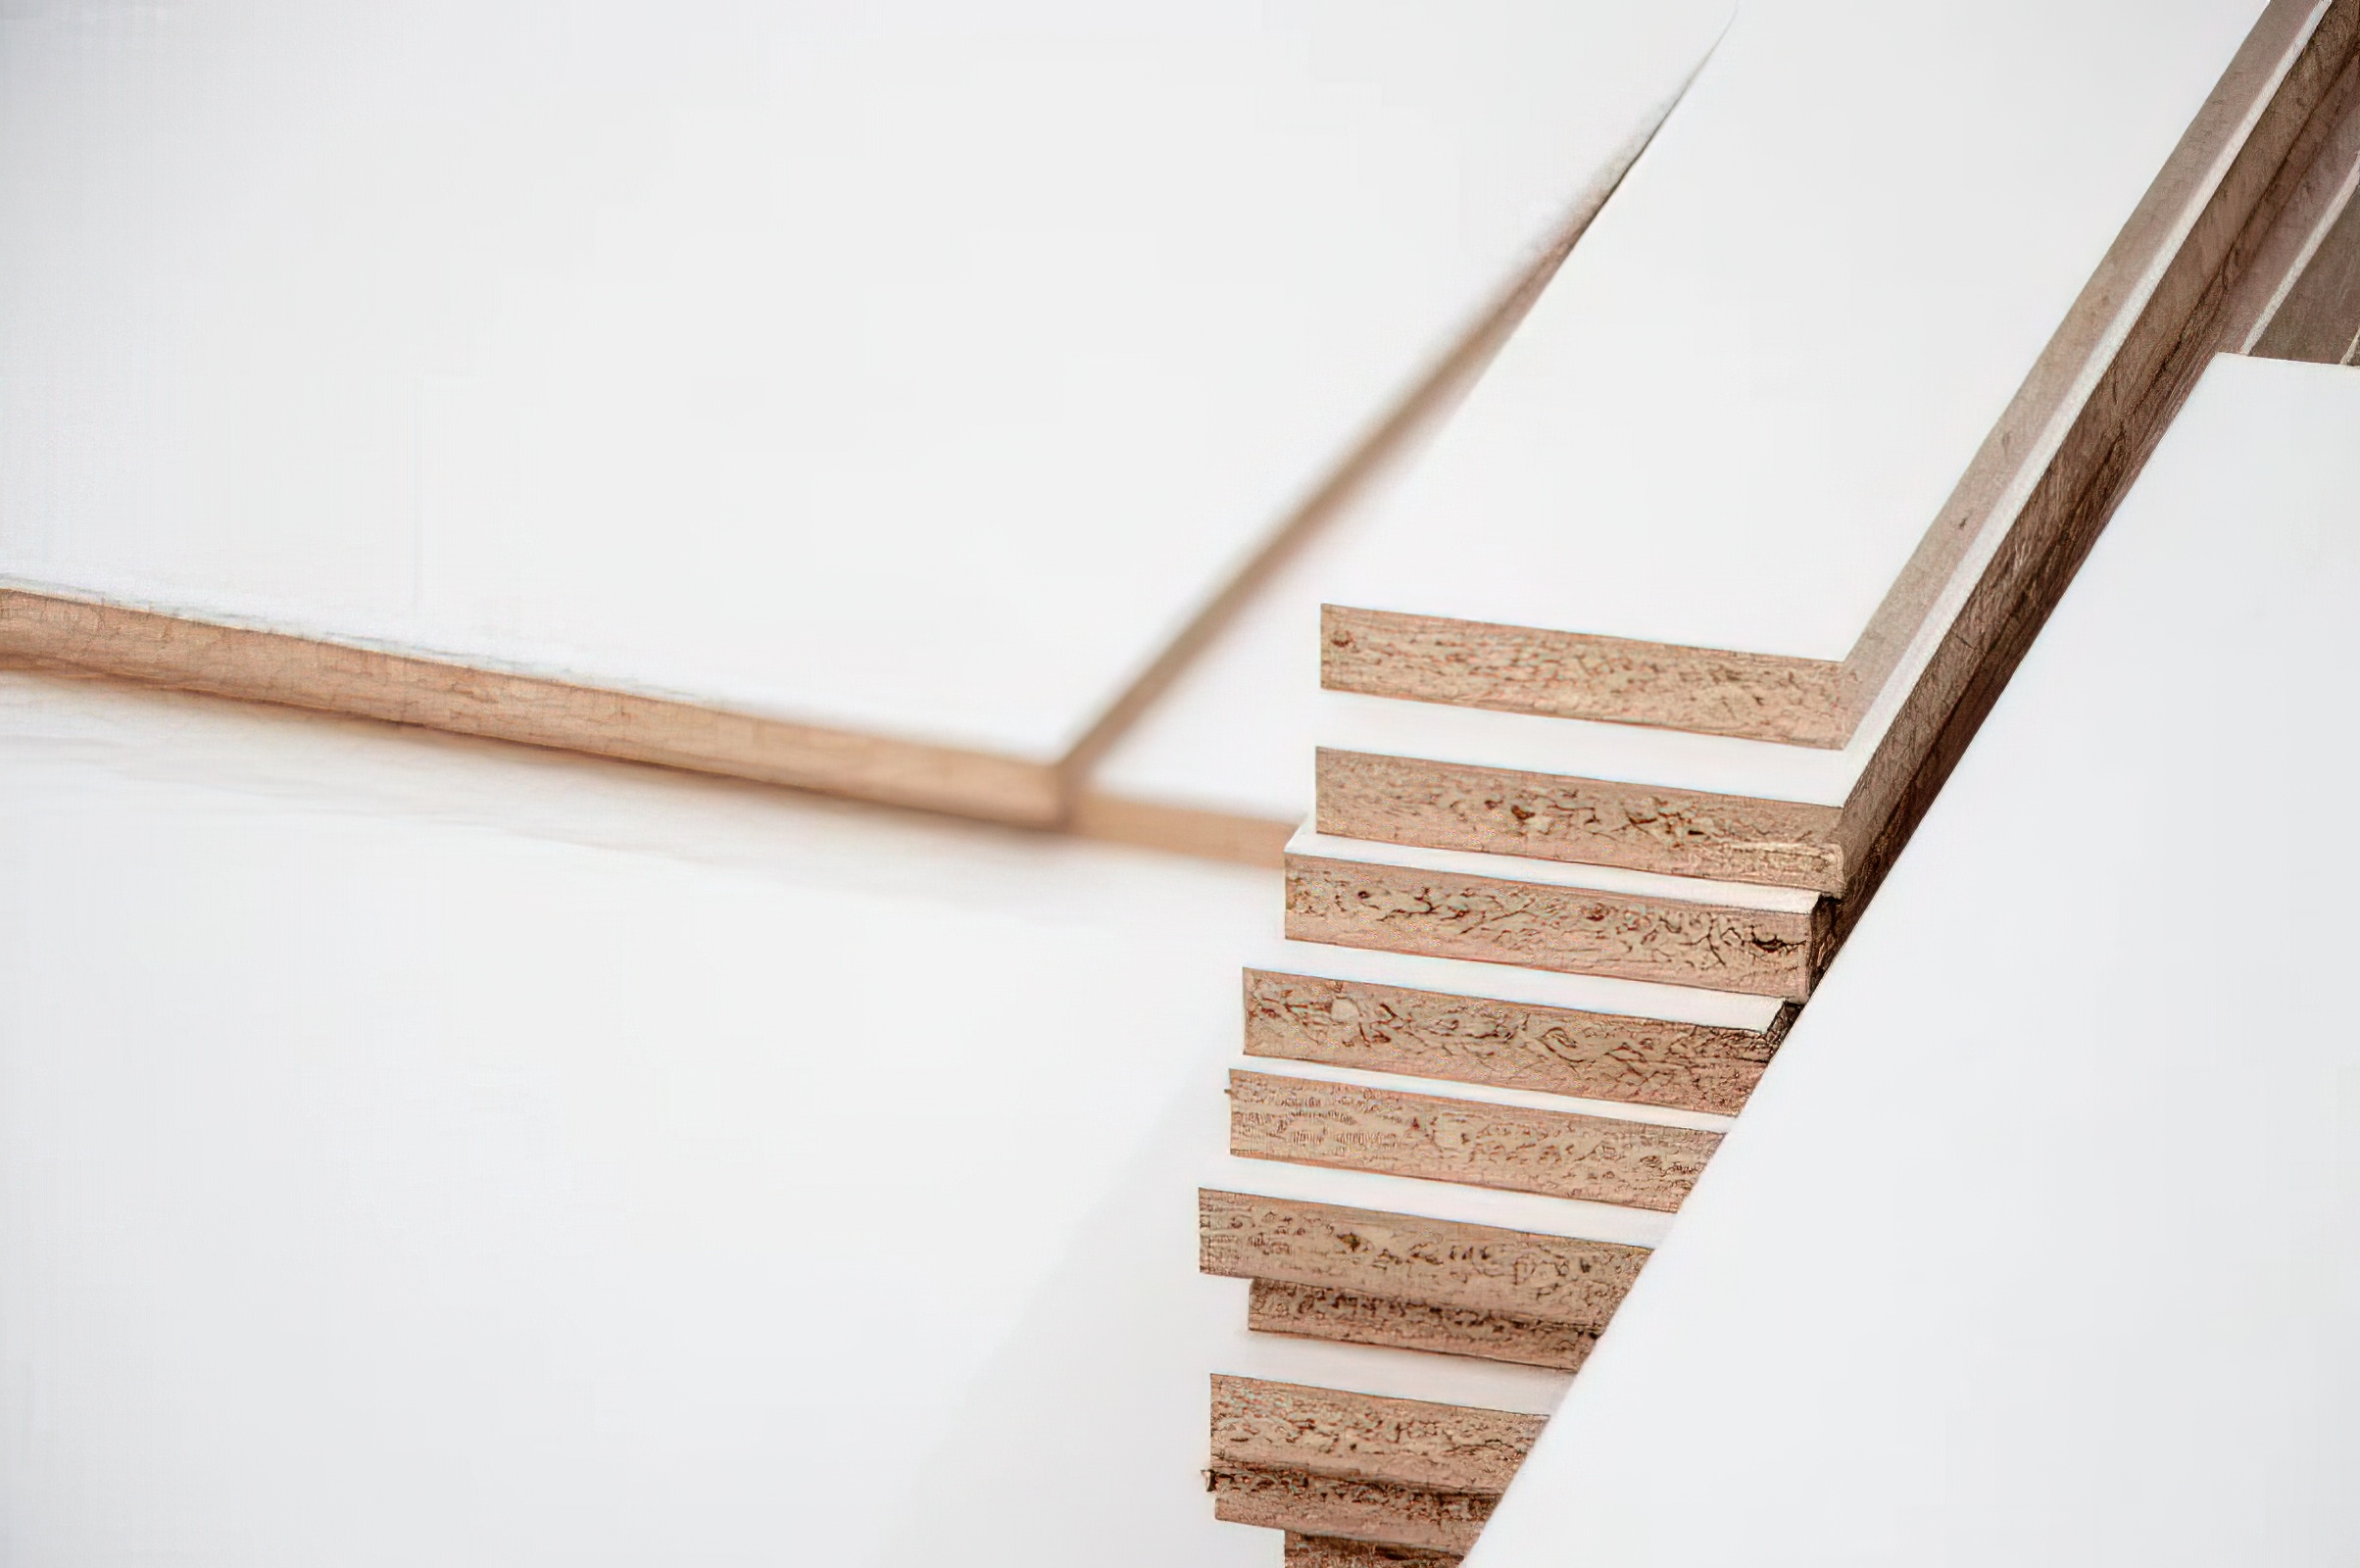 sandwiched between two outer thin layers of MDF (medium-density fiberboard).